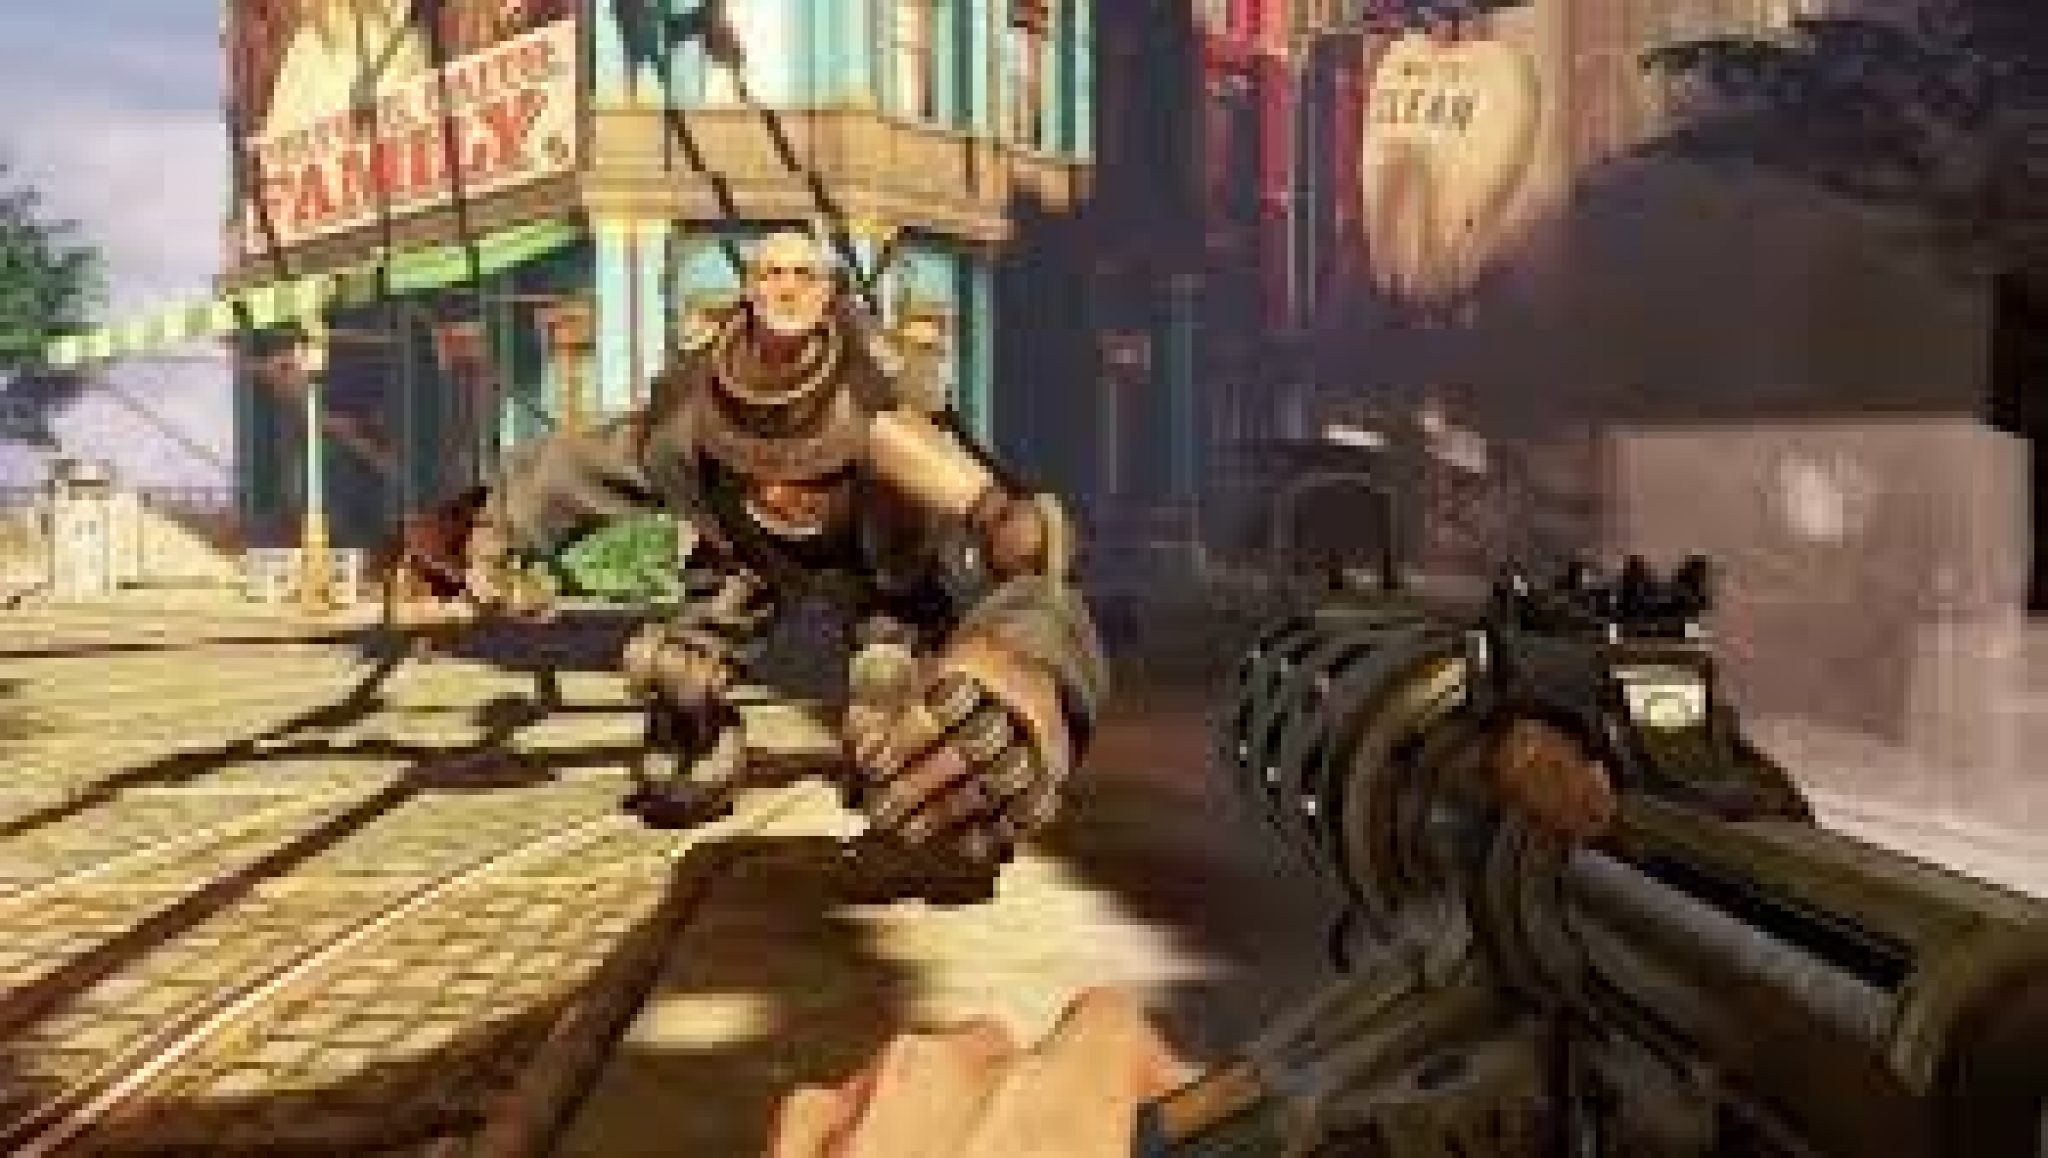 bioshock collection free download pc highly compressed